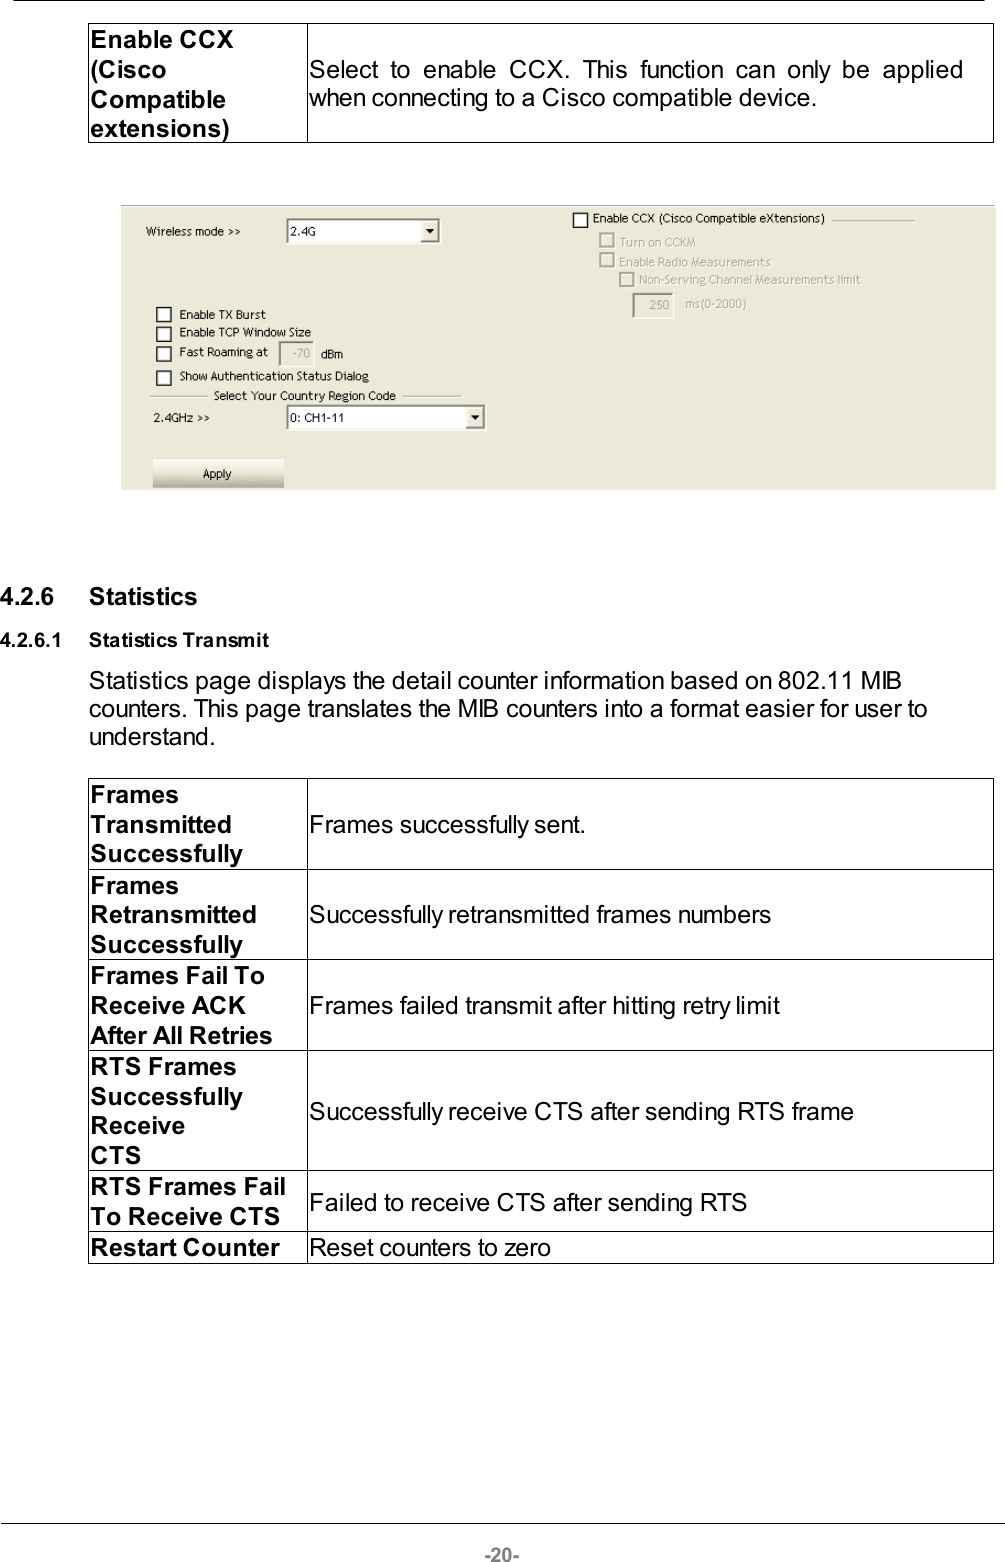 -20-Enable CCX (CiscoCompatibleextensions)Select  to  enable  CCX.  This  function  can  only  be  appliedwhen connecting to a Cisco compatible device. 4.2.6 Statistics4.2.6.1 Statistics TransmitStatistics page displays the detail counter information based on 802.11 MIBcounters. This page translates the MIB counters into a format easier for user tounderstand.FramesTransmittedSuccessfullyFrames successfully sent.FramesRetransmittedSuccessfullySuccessfully retransmitted frames numbersFrames Fail ToReceive ACKAfter All RetriesFrames failed transmit after hitting retry limit RTS FramesSuccessfullyReceive CTS Successfully receive CTS after sending RTS frameRTS Frames FailTo Receive CTSFailed to receive CTS after sending RTSRestart CounterReset counters to zero